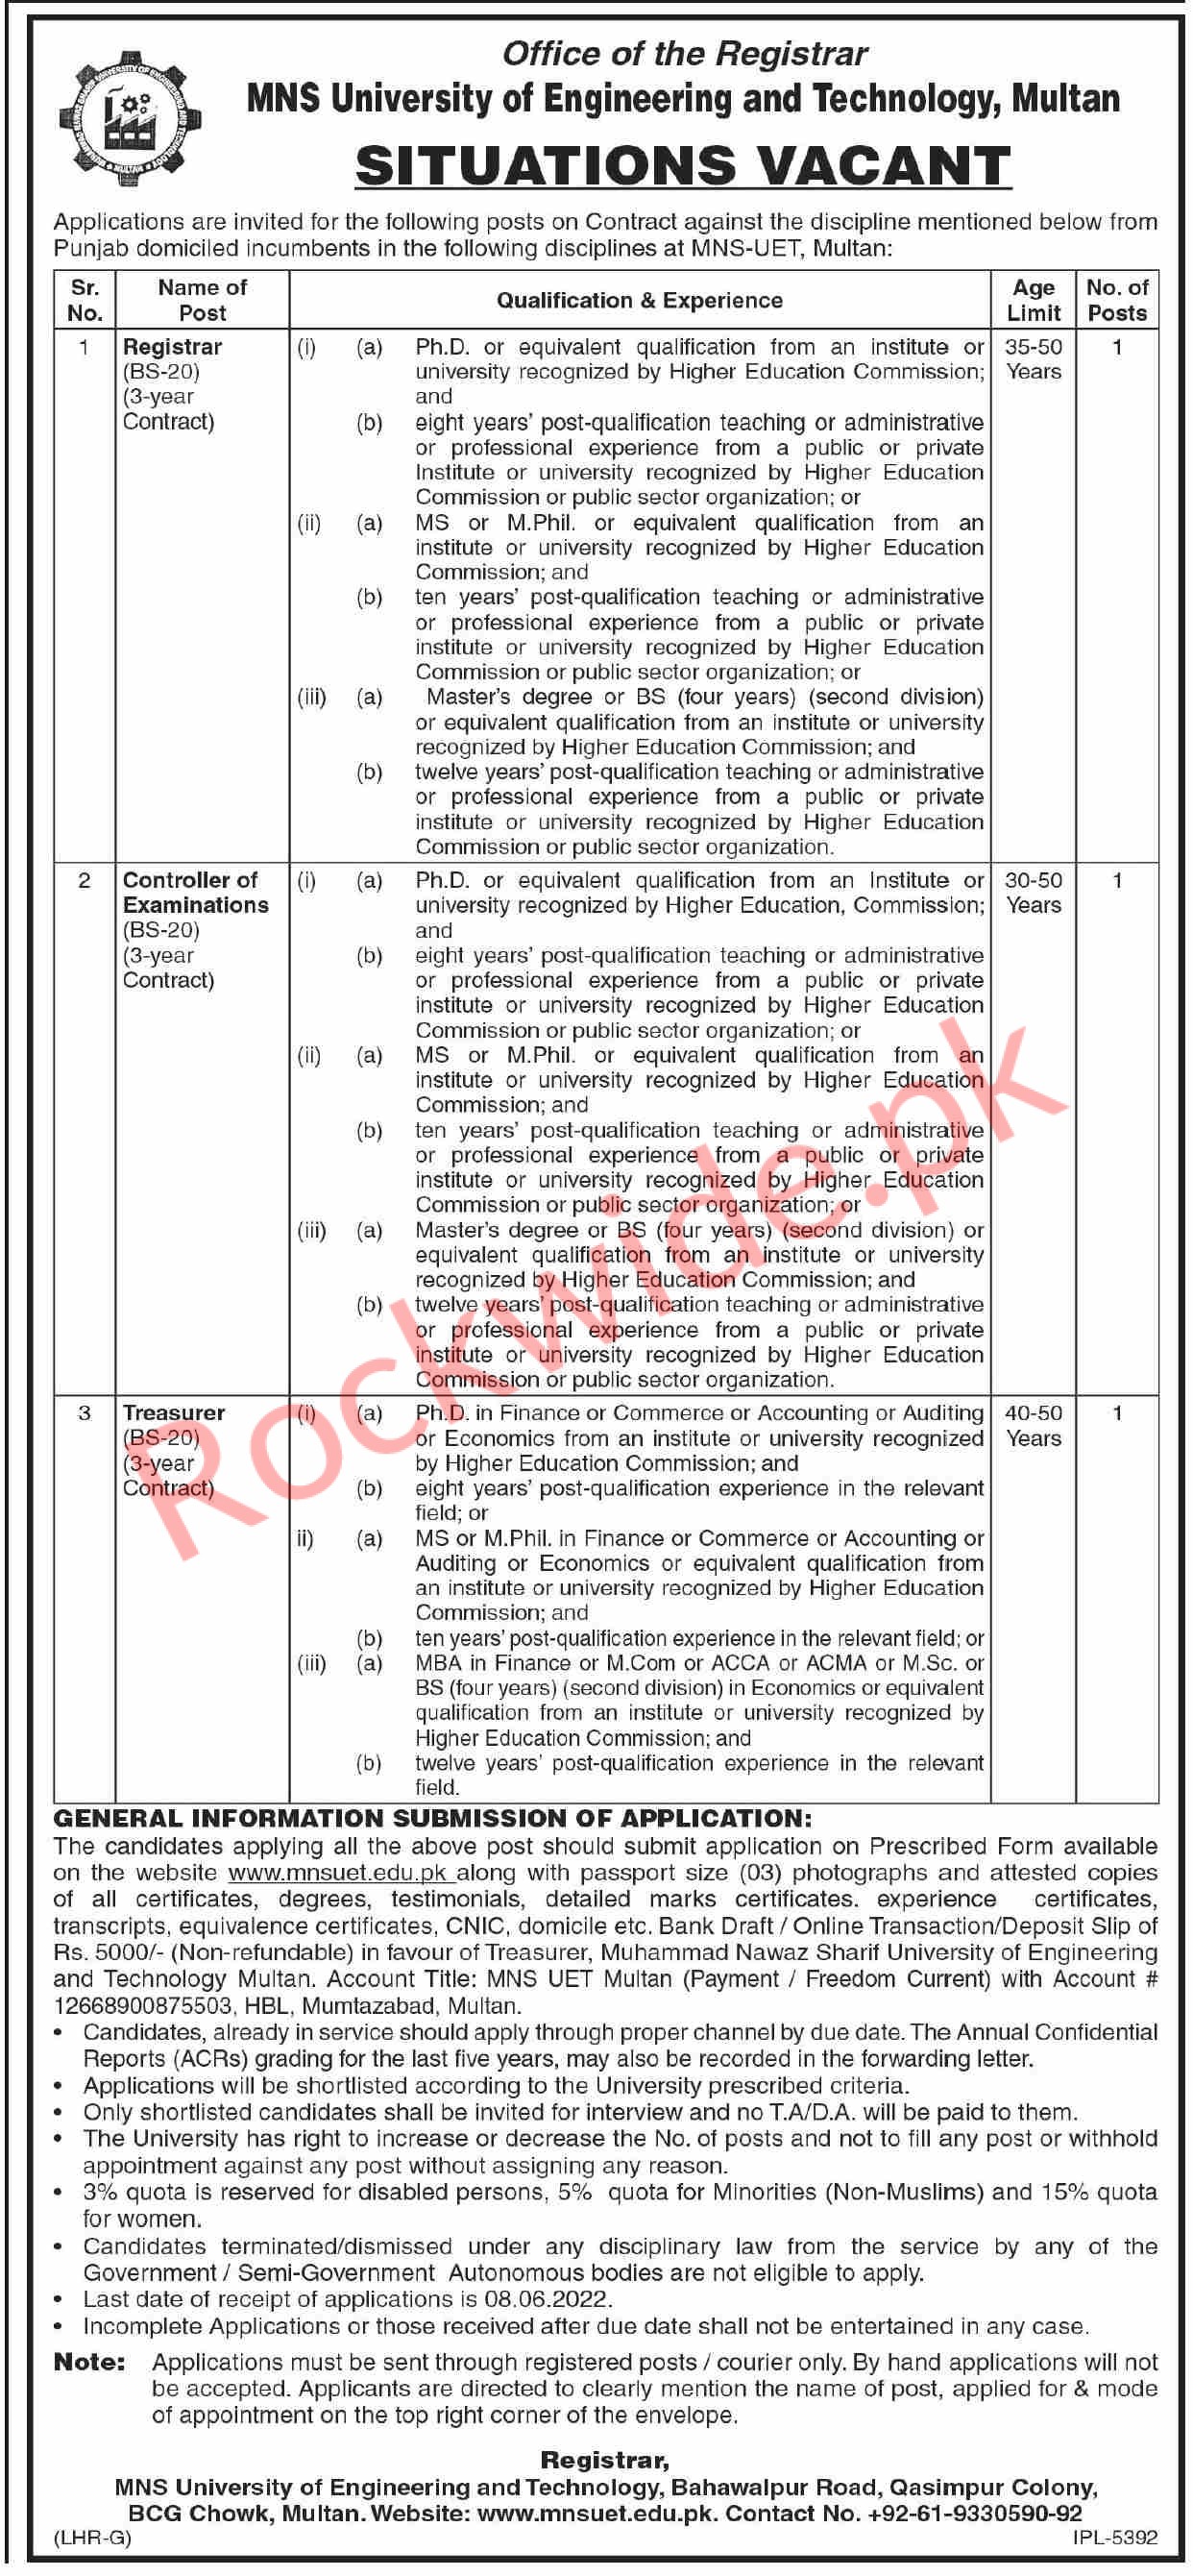 MNS University of Engineer And Technology jobs in multan